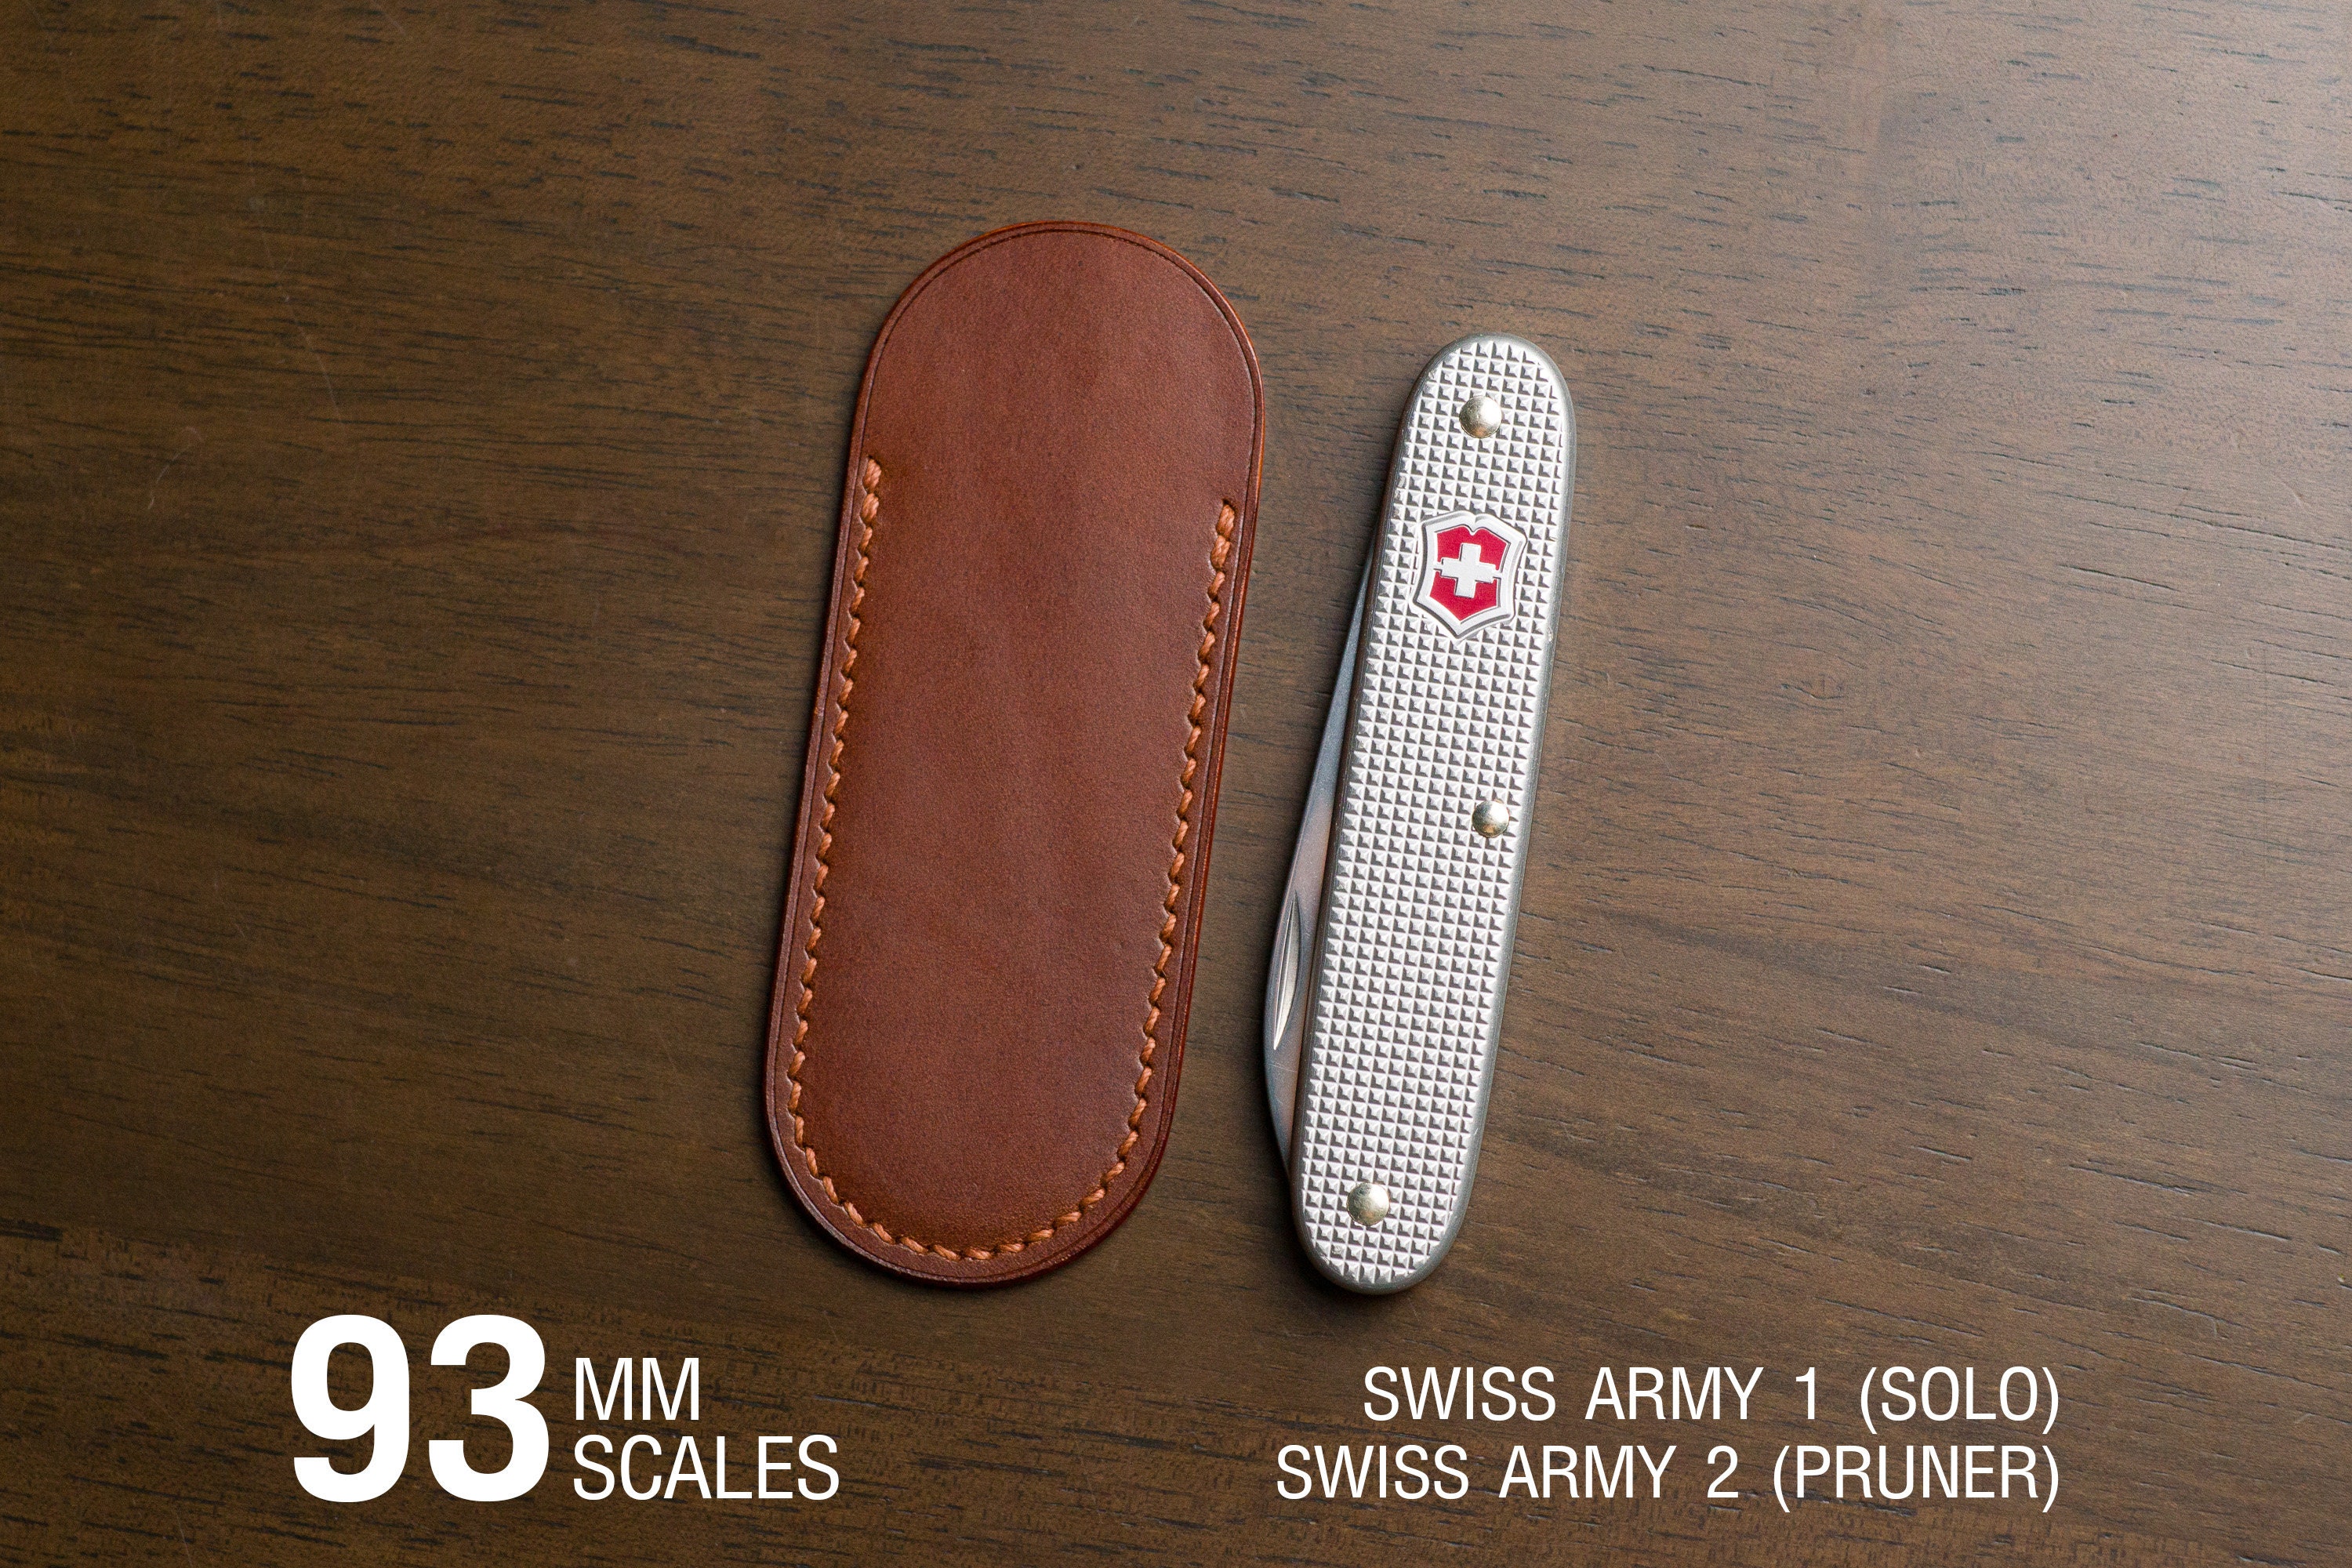 Leather Sheath for Victorinox Alox, Swiss Army 1 solo, Swiss Army 2 pruner,  93 Mm Scales, Handmade, Buttero, Veg-tan Leather 